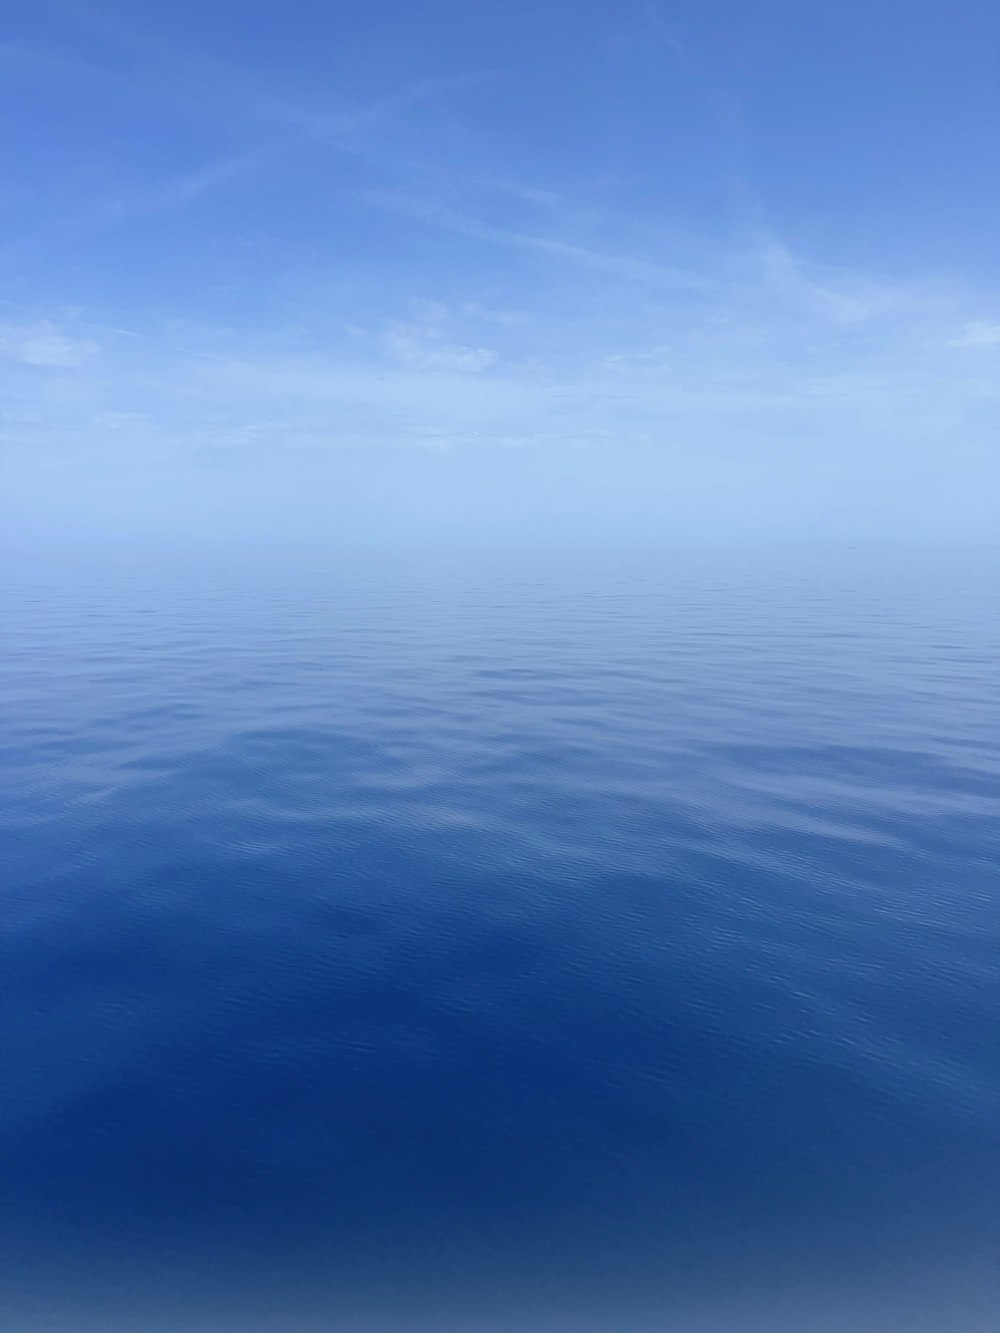 a body of water with a blue sky above